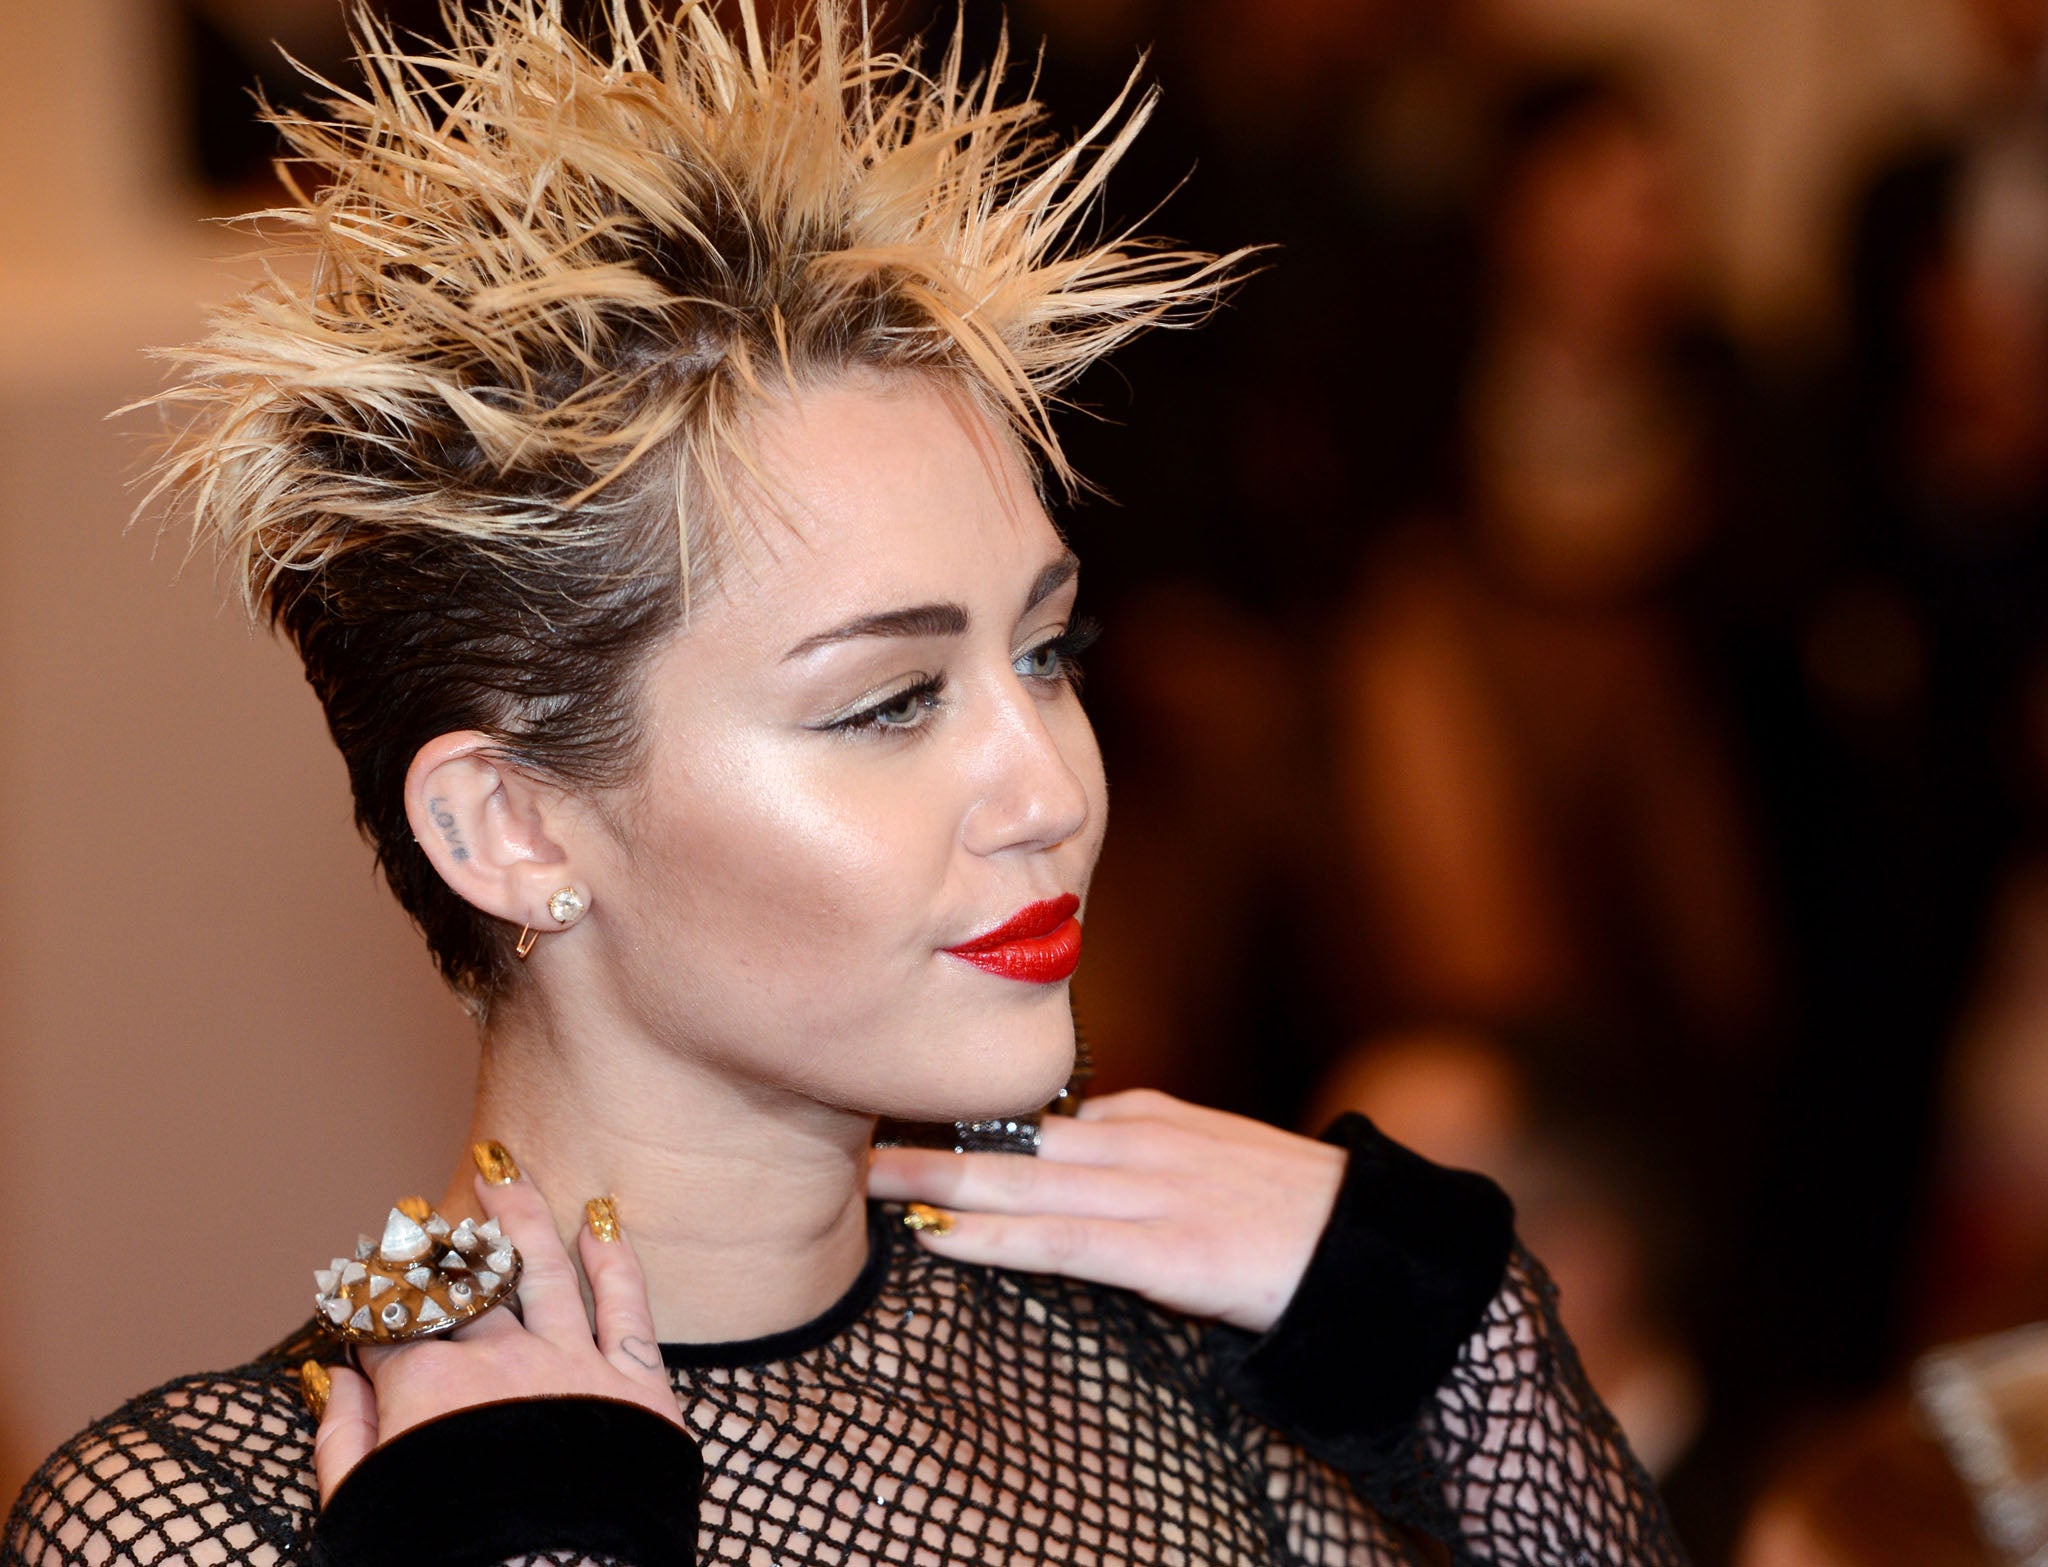 christina schopf recommends miley cyrus look alike pic